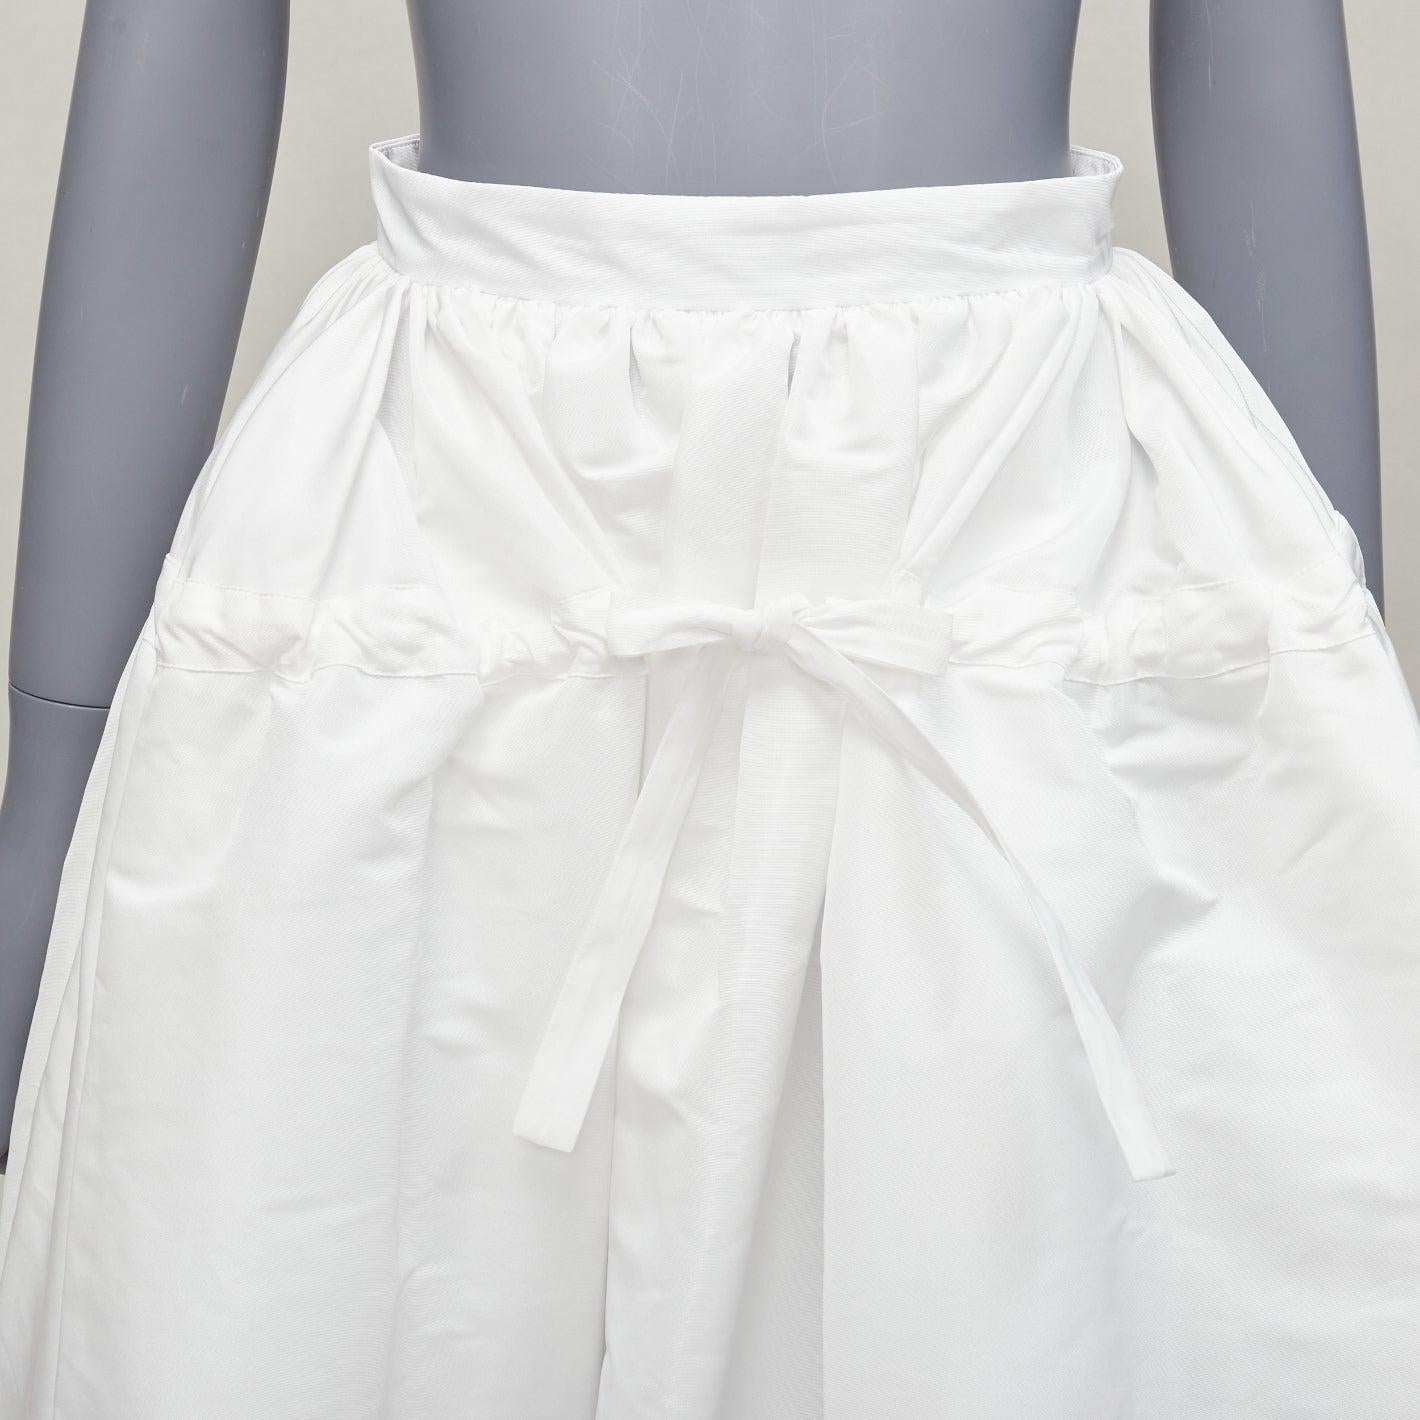 ALEXANDER MCQUEEN white drawstring tie detail puff flared full skirt IT38 XS
Reference: AAWC/A00955
Brand: Alexander McQueen
Designer: Sarah Burton
Material: Polyester
Color: White
Pattern: Solid
Closure: Zip
Lining: White Fabric
Extra Details: Back